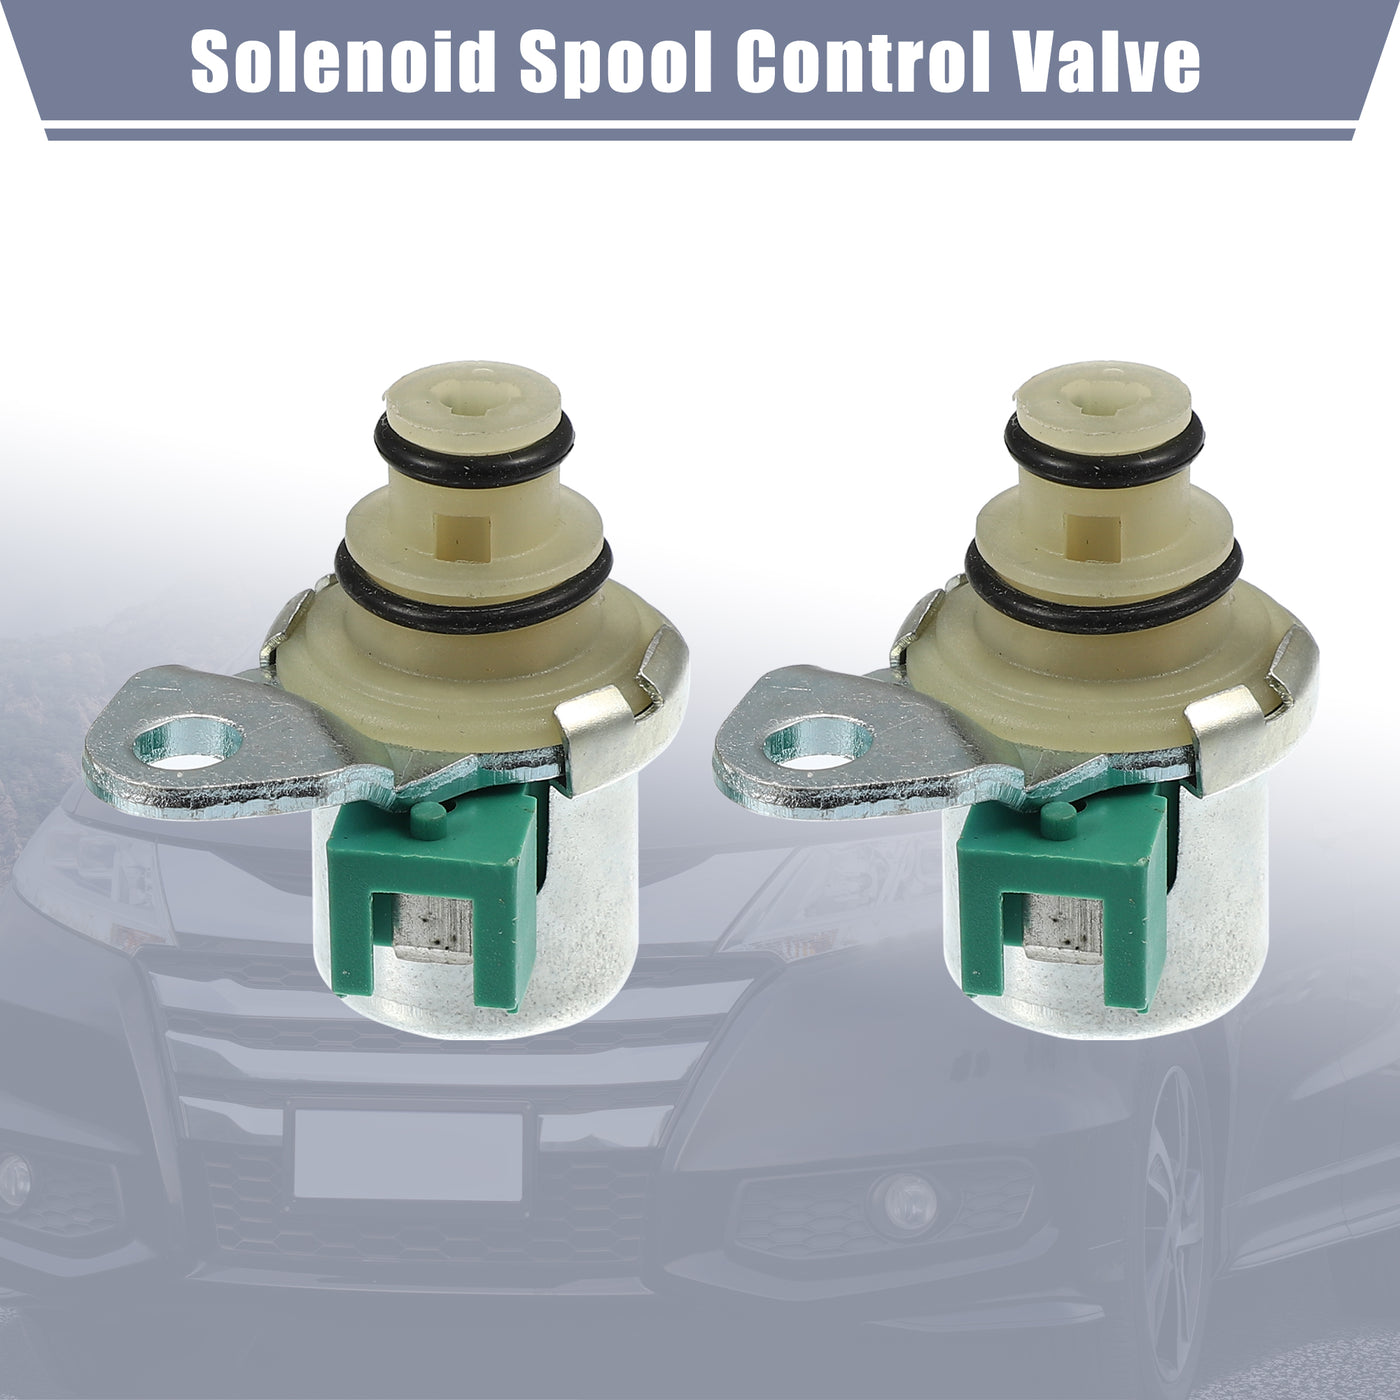 X AUTOHAUX 1 Pair Solenoid Spool Control Valve for Ford for Mazda 1999-On 4F27E FN4A-EL Model 4-Speed Transmission Variable Timing Solenoid